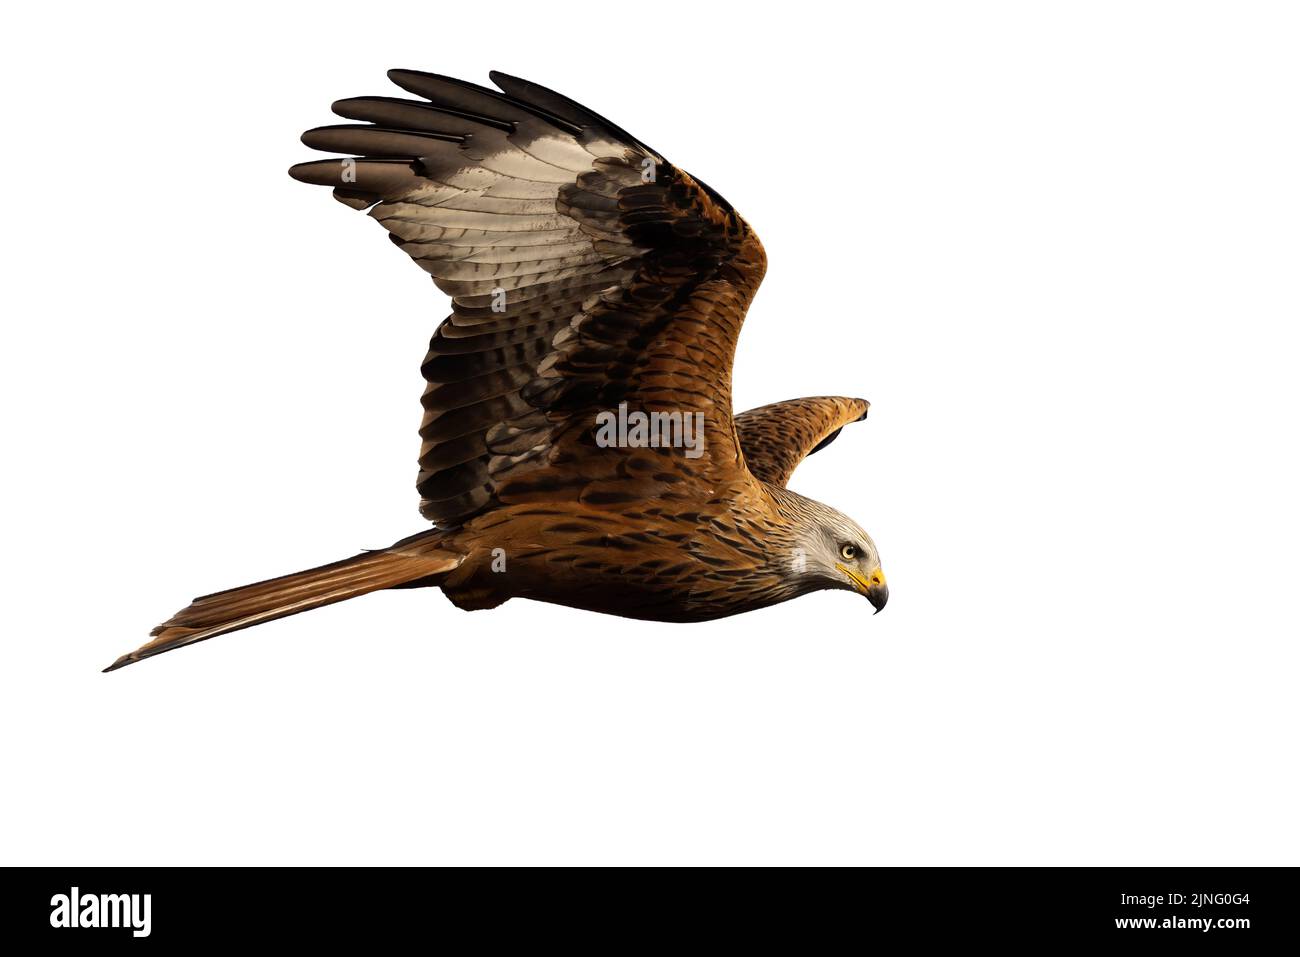 Red kite flying in the air isolated on white background Stock Photo